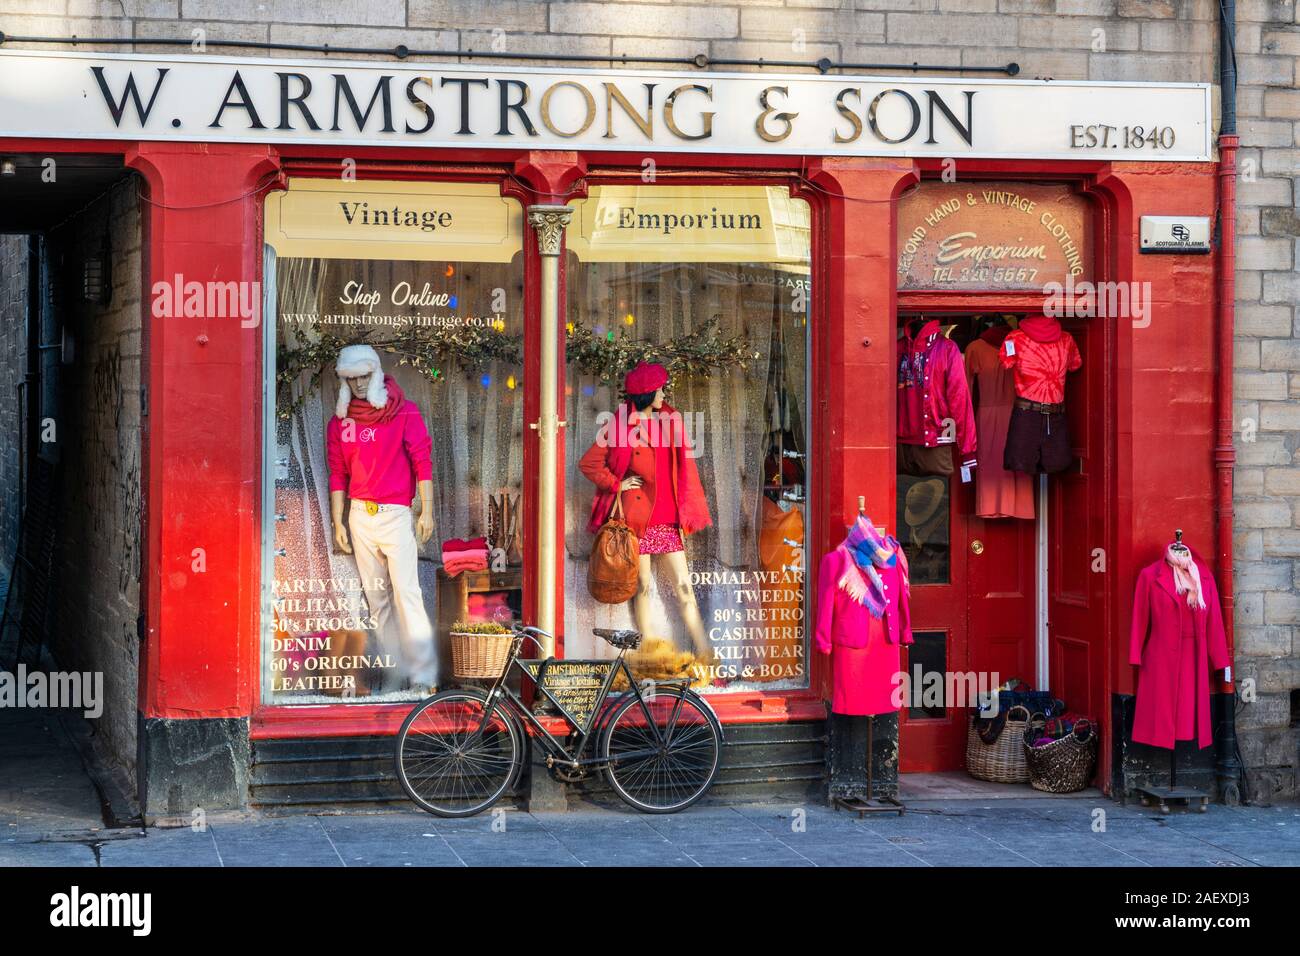 Vintage Clothing Shop High Resolution Stock Photography and Images - Alamy